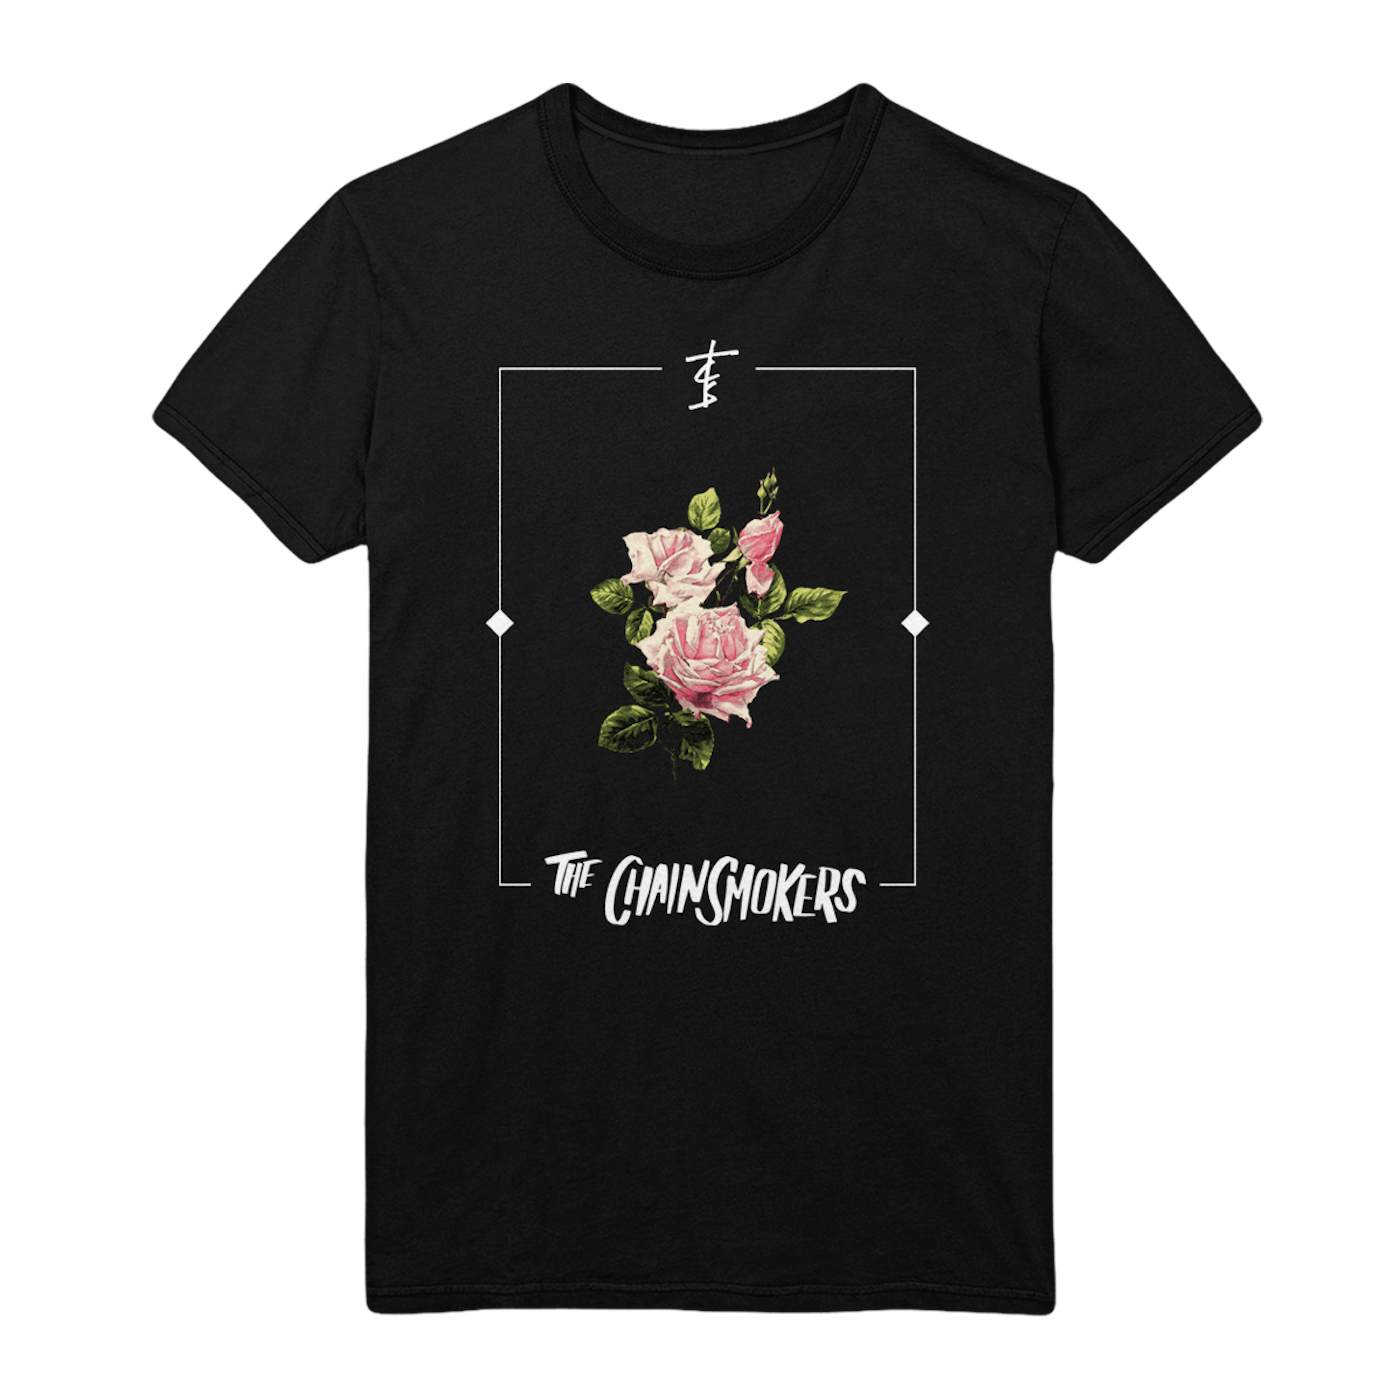 The Chainsmokers Rose Remix Tee